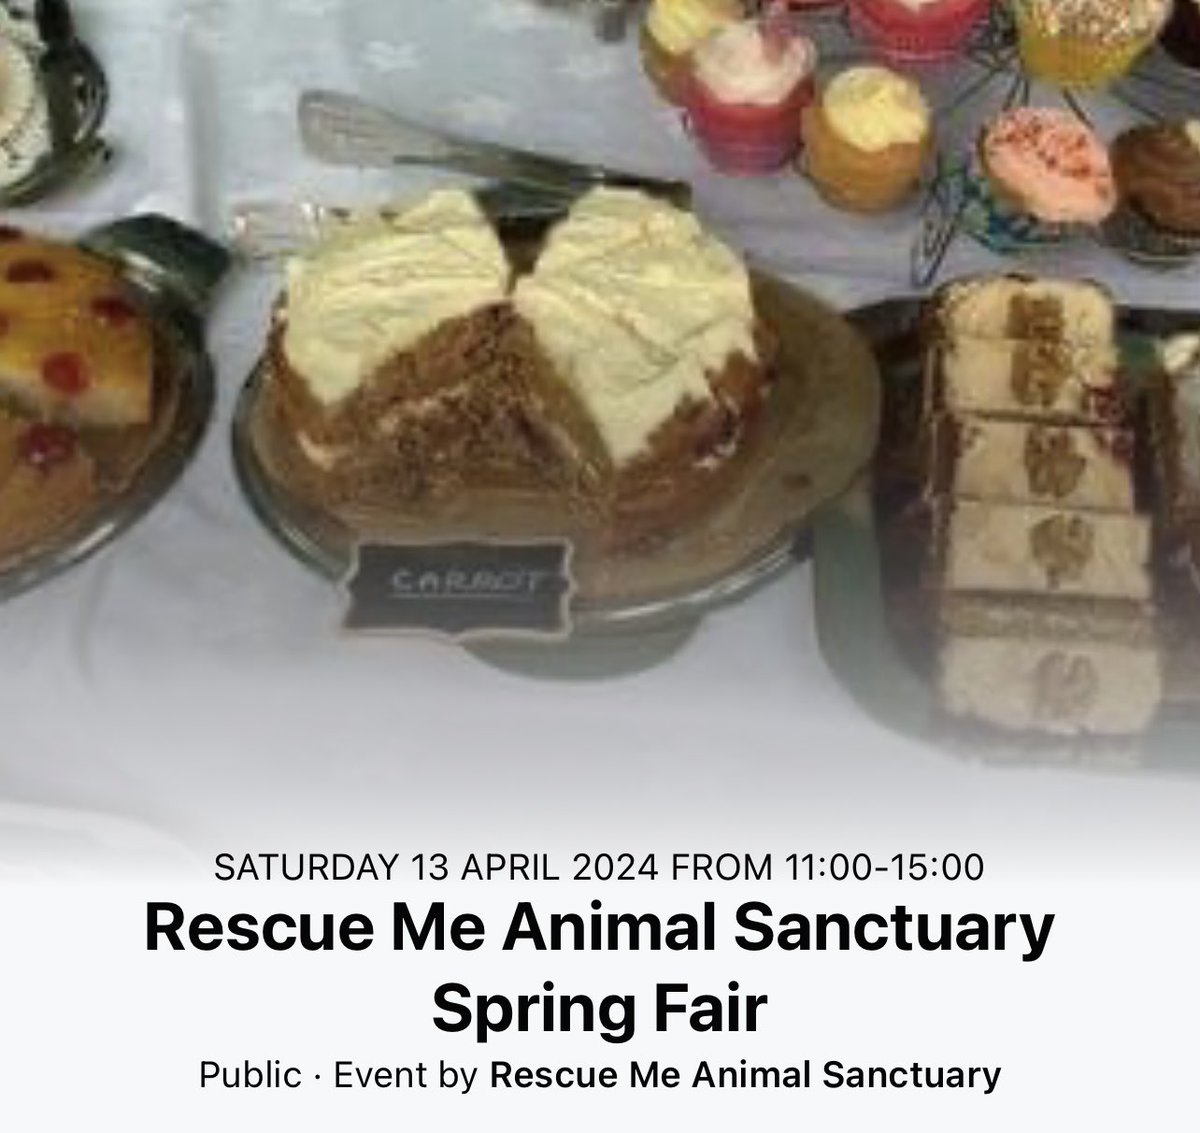 Date for diary at St Cuthbert’s church hall Sat 13/4 11-3pm Spring Fair for @rescuemeanimal